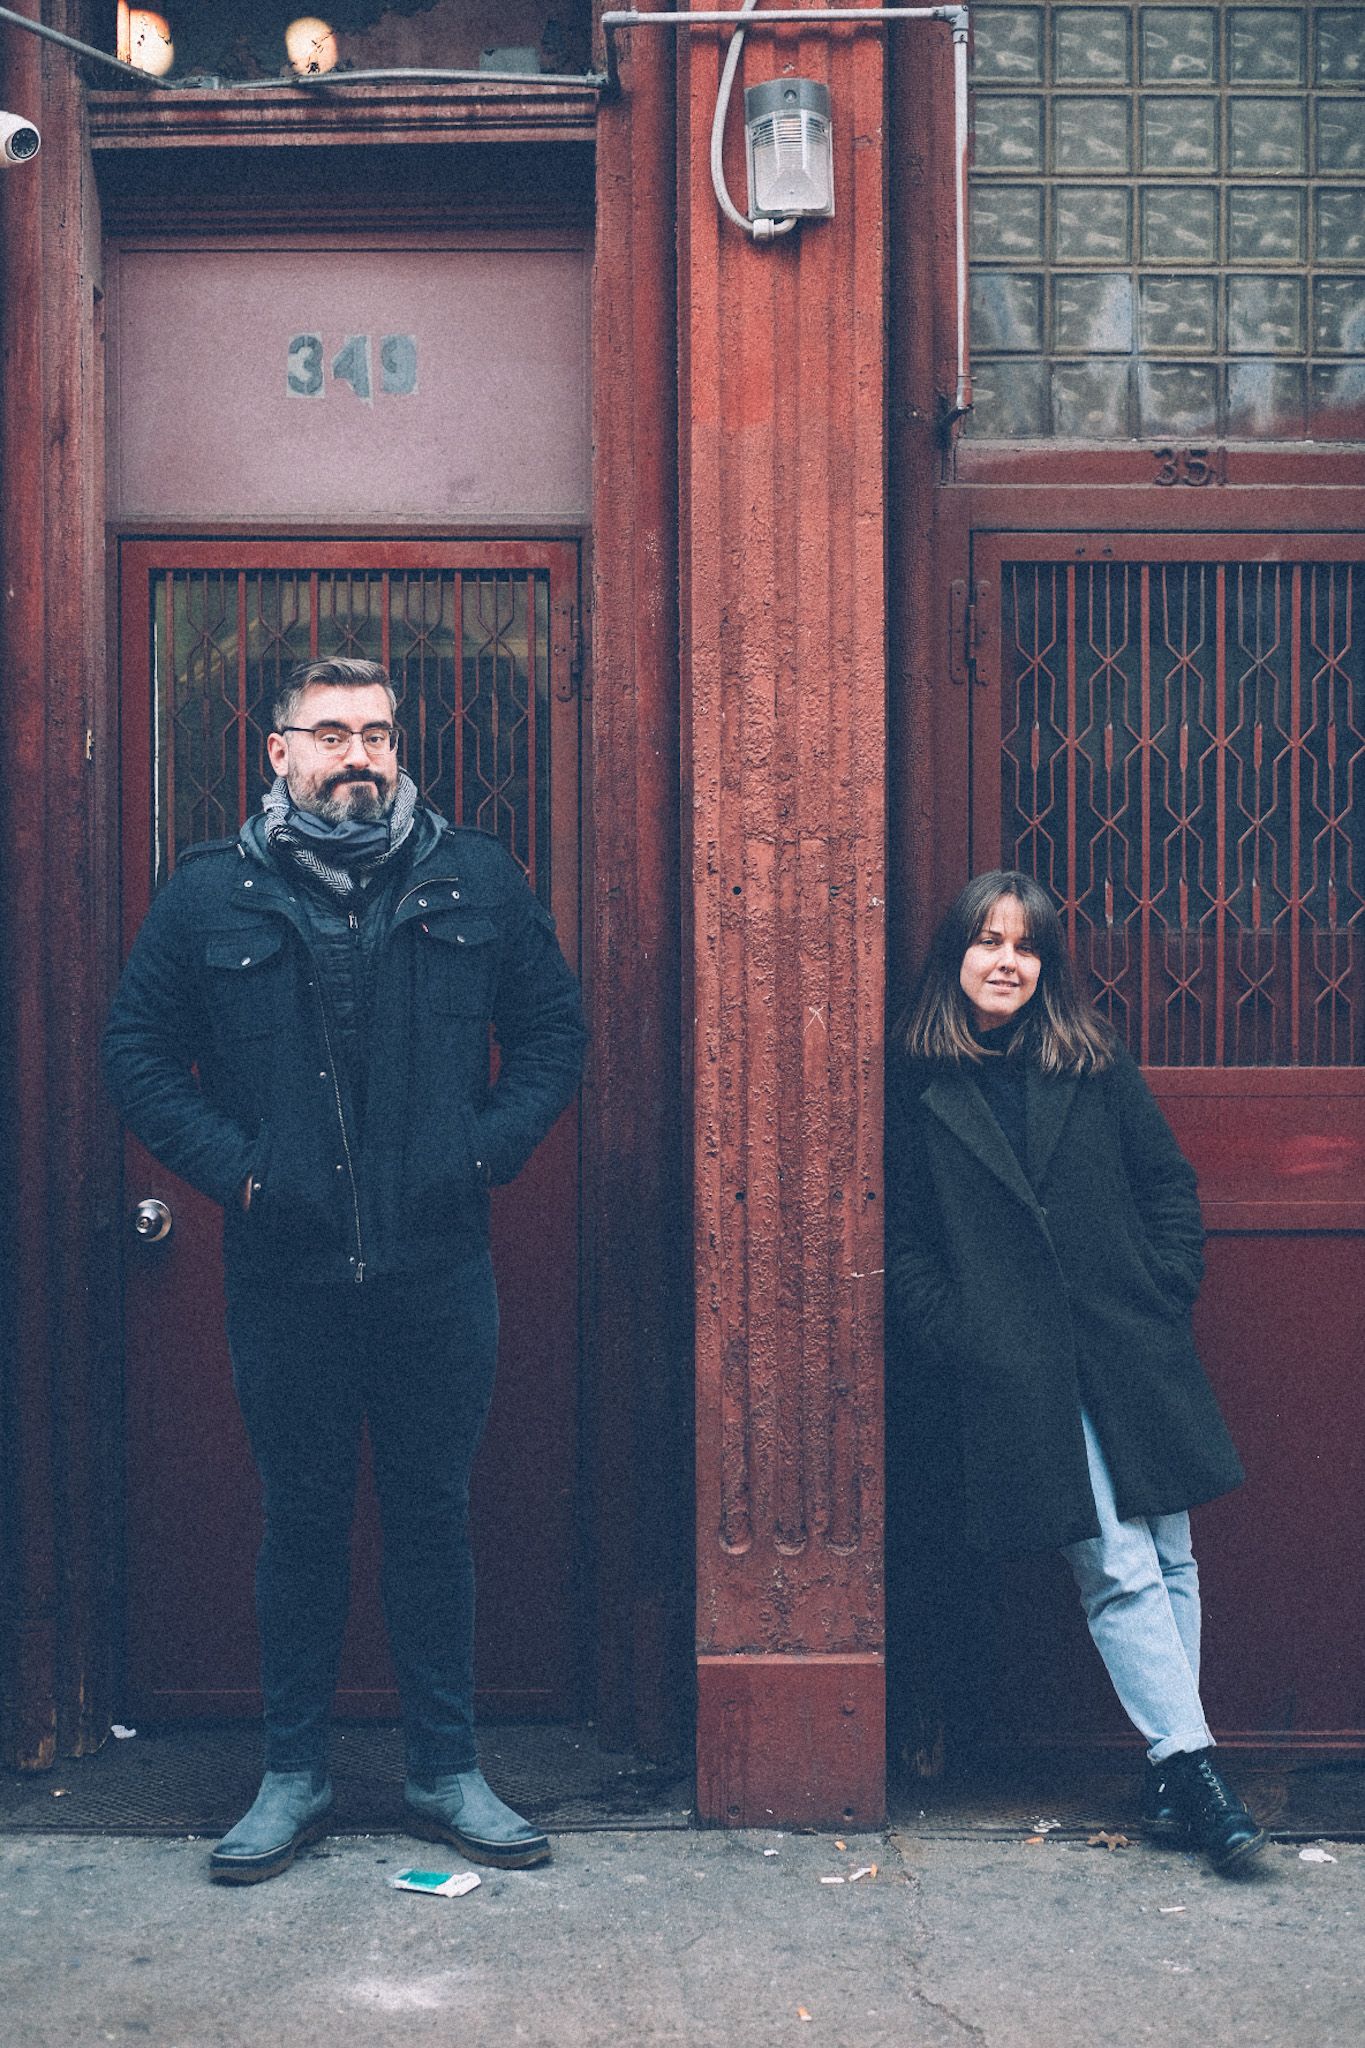 A man and a woman each stand in front of a rusty red door of an old building, split by a pole. They wear winter coats. The pattern on the doors is elegant and squiggled.